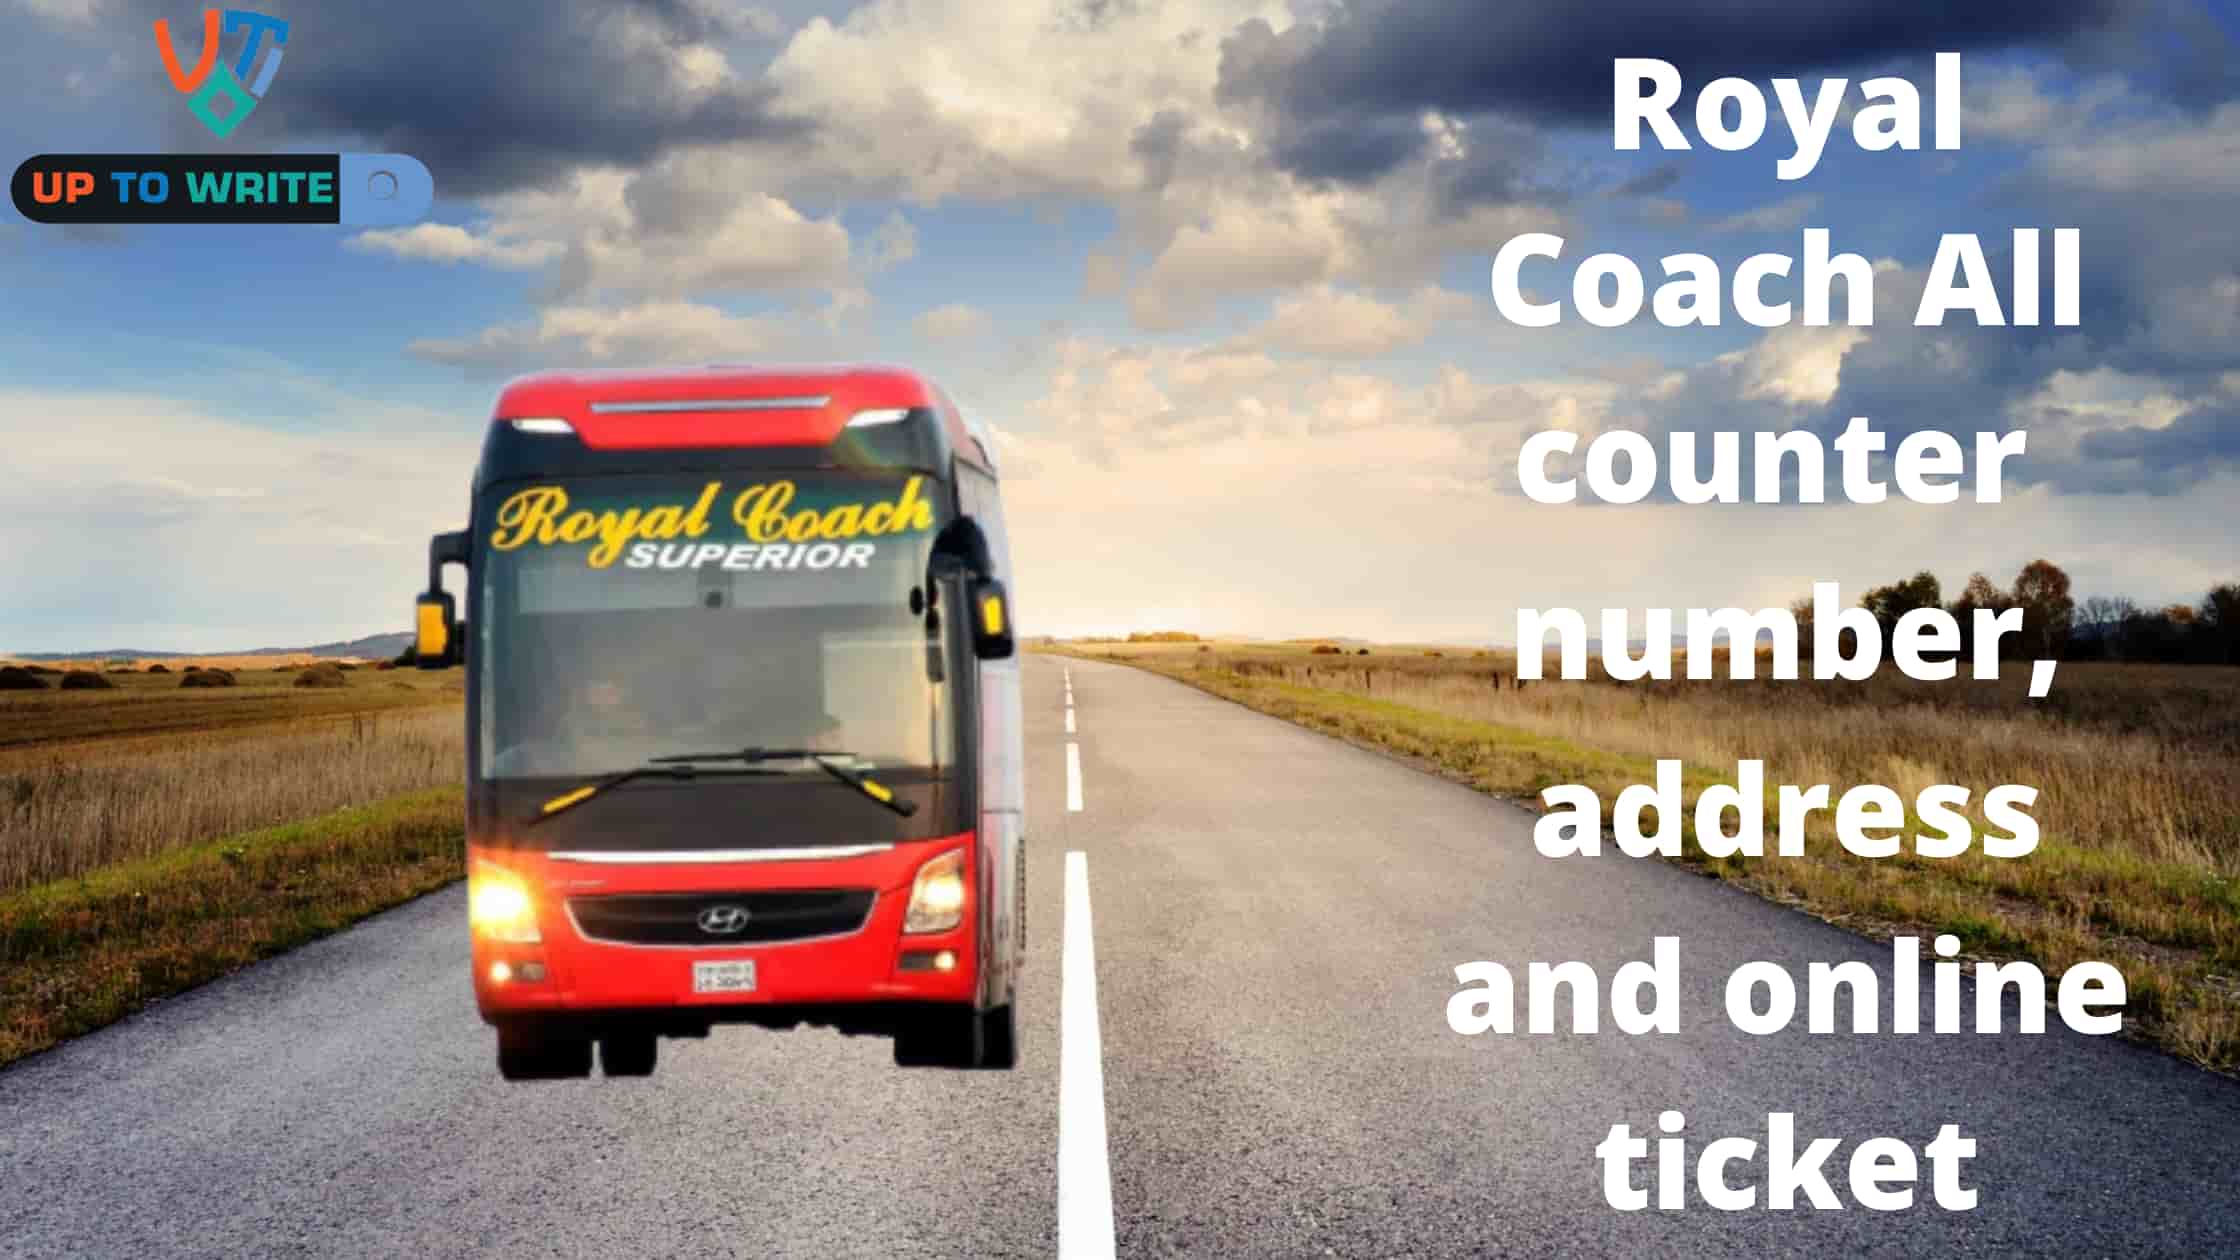 Royal Coach - All counter mobile number, address and online ticket